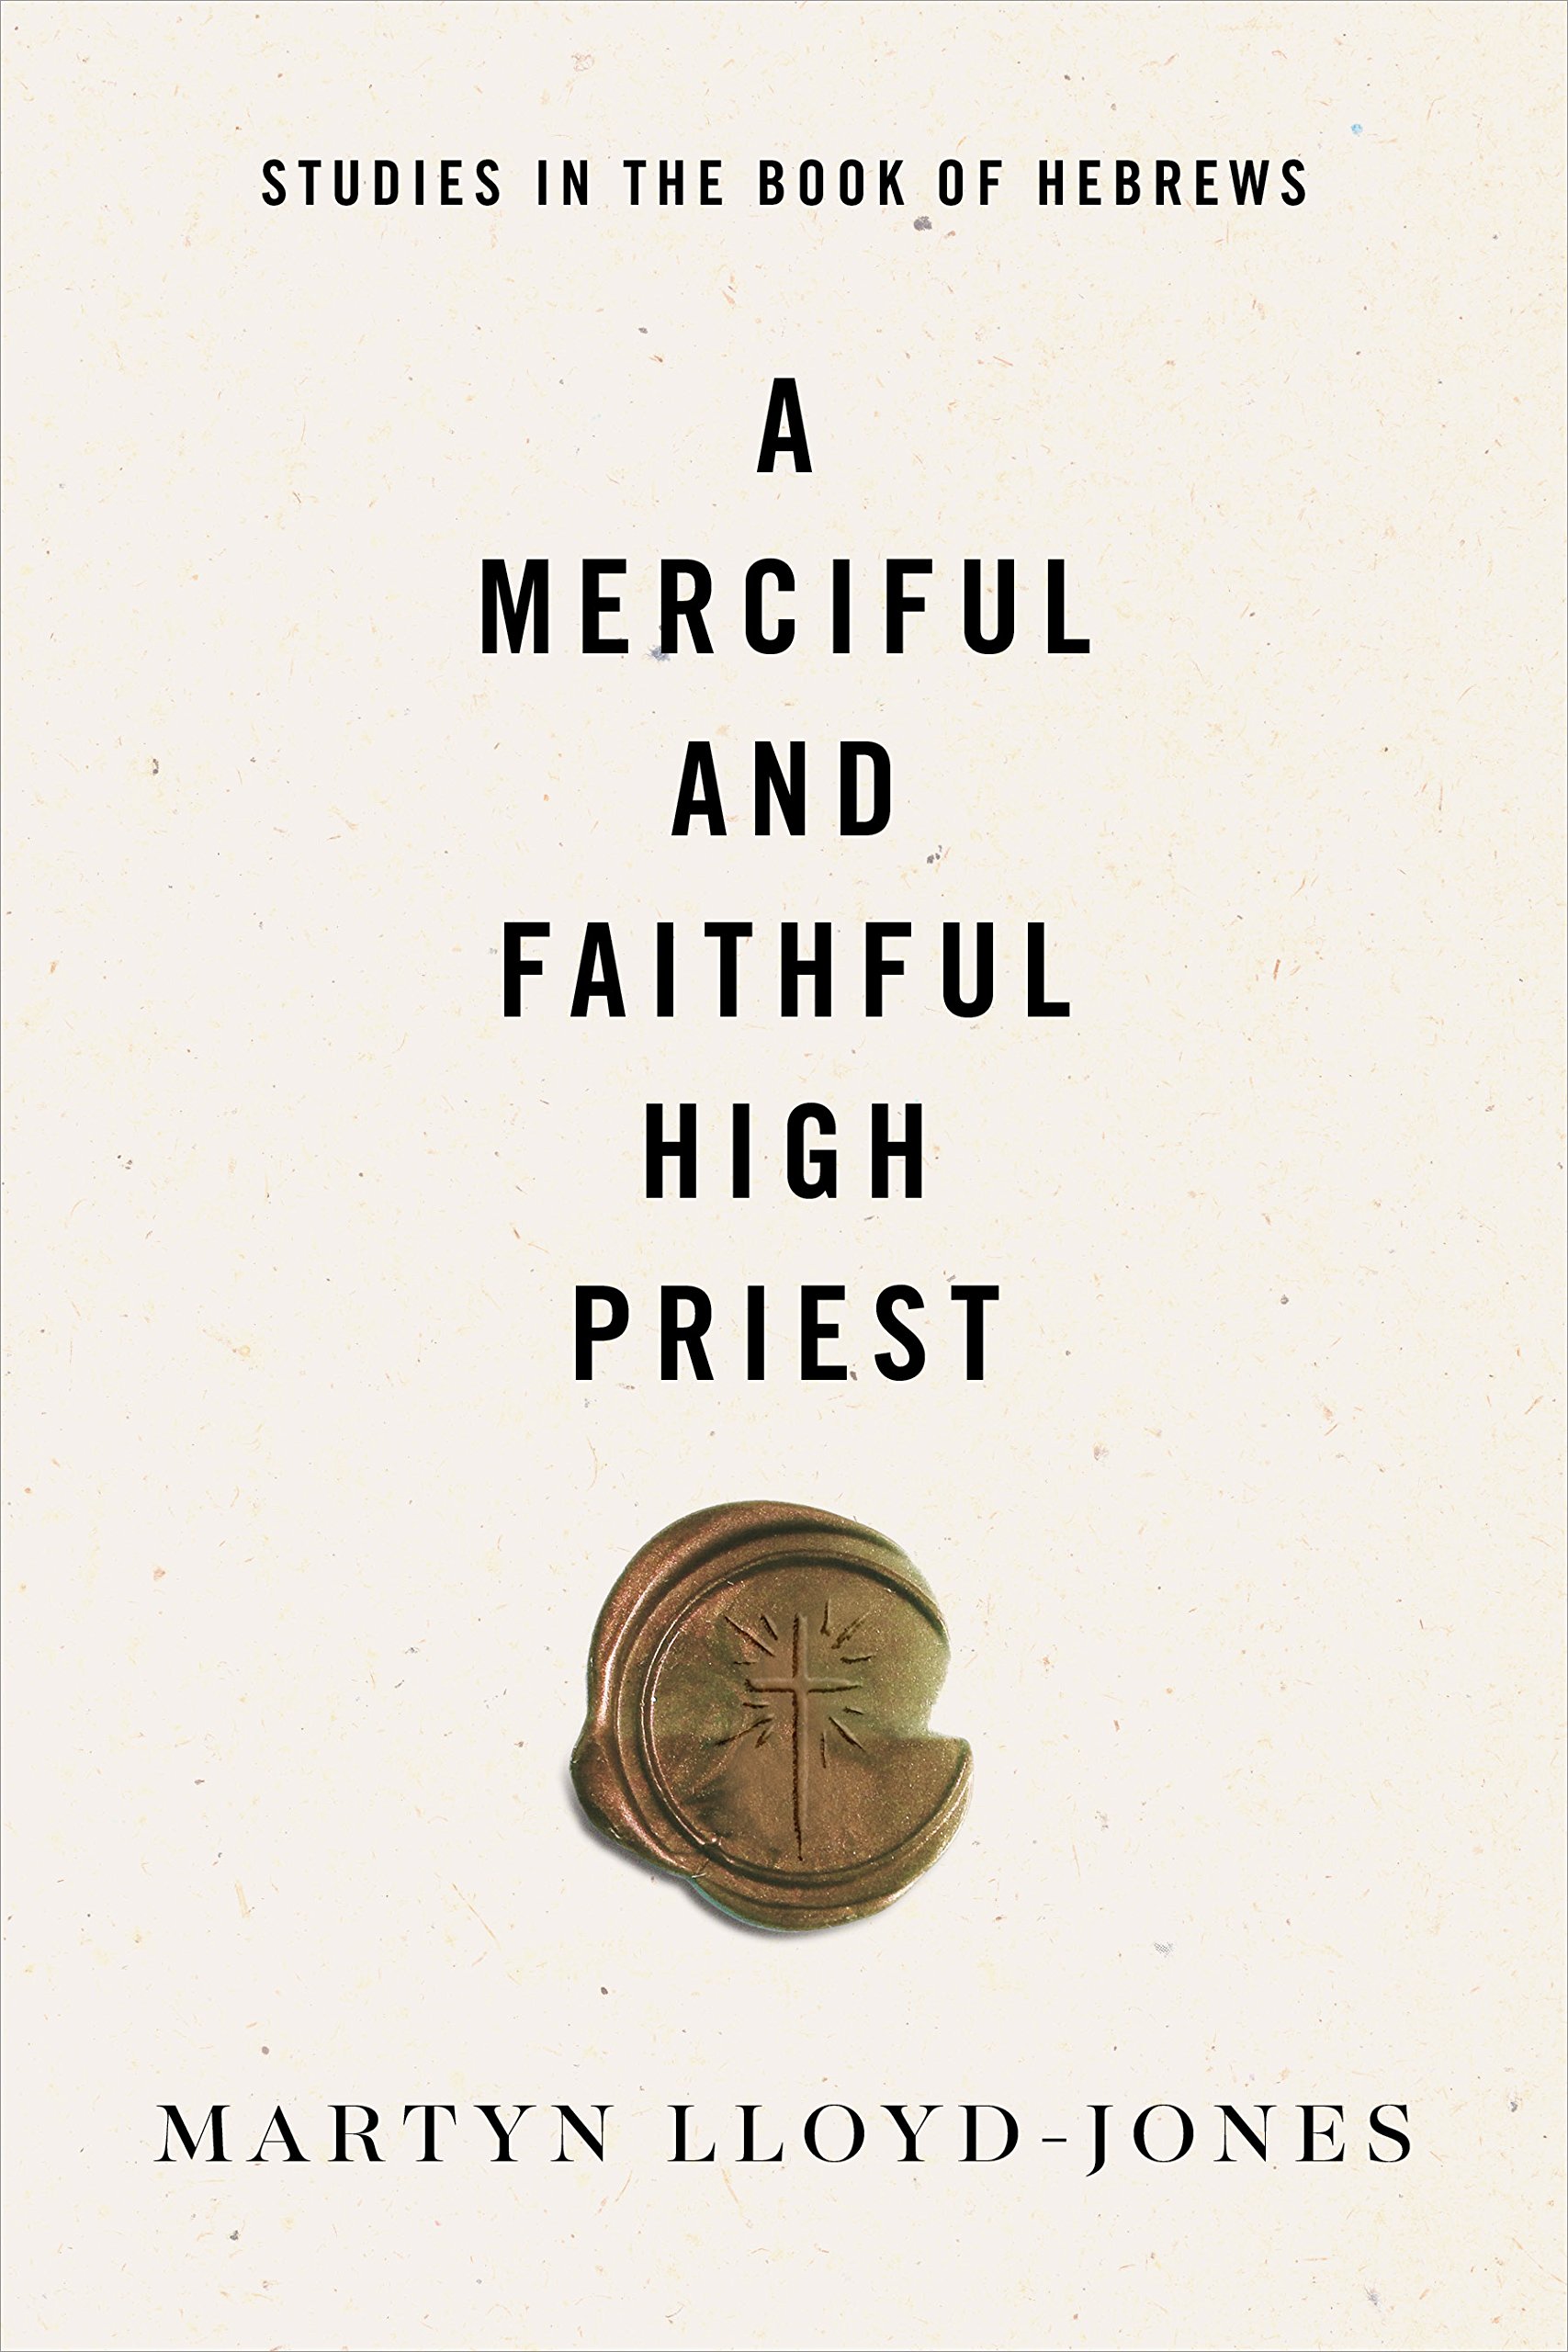 Book Notice: A MERCIFUL AND FAITHFUL HIGH PRIEST: STUDIES IN THE BOOK OF HEBREWS, by D. Martyn Lloyd-Jones